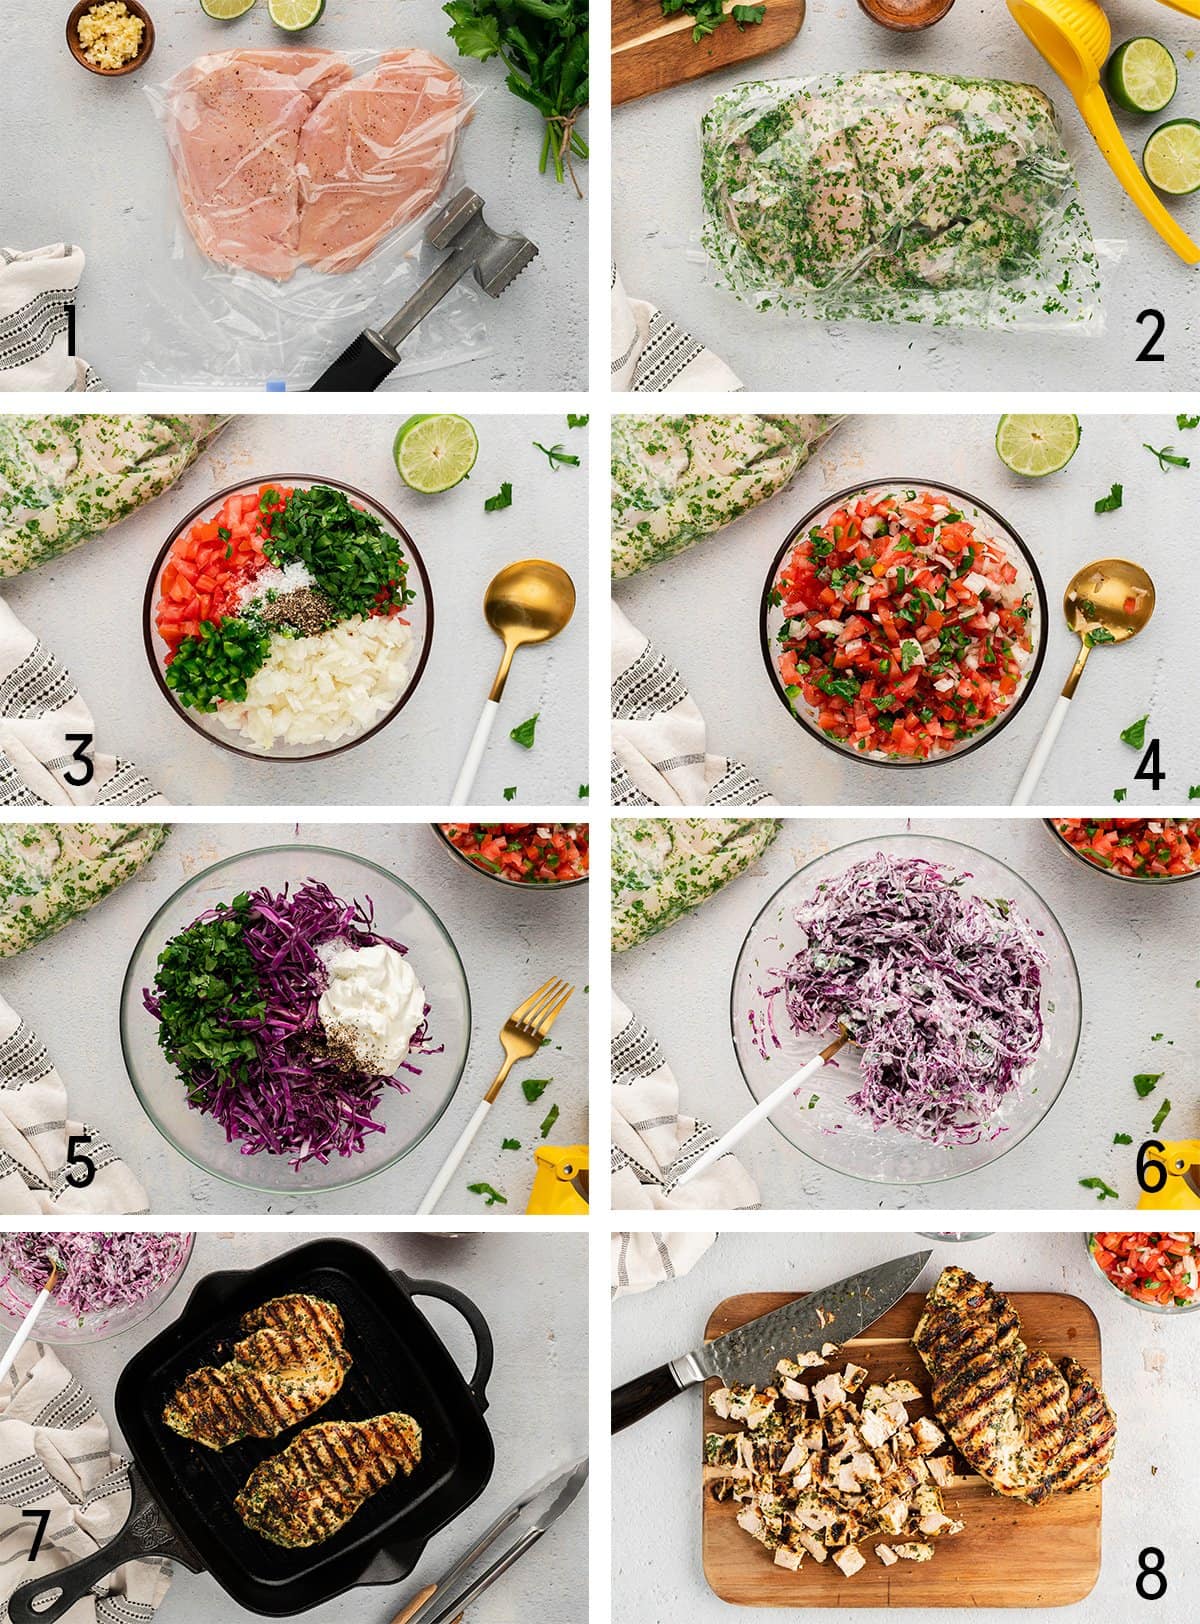 Collage of images showing how to make street tacos.